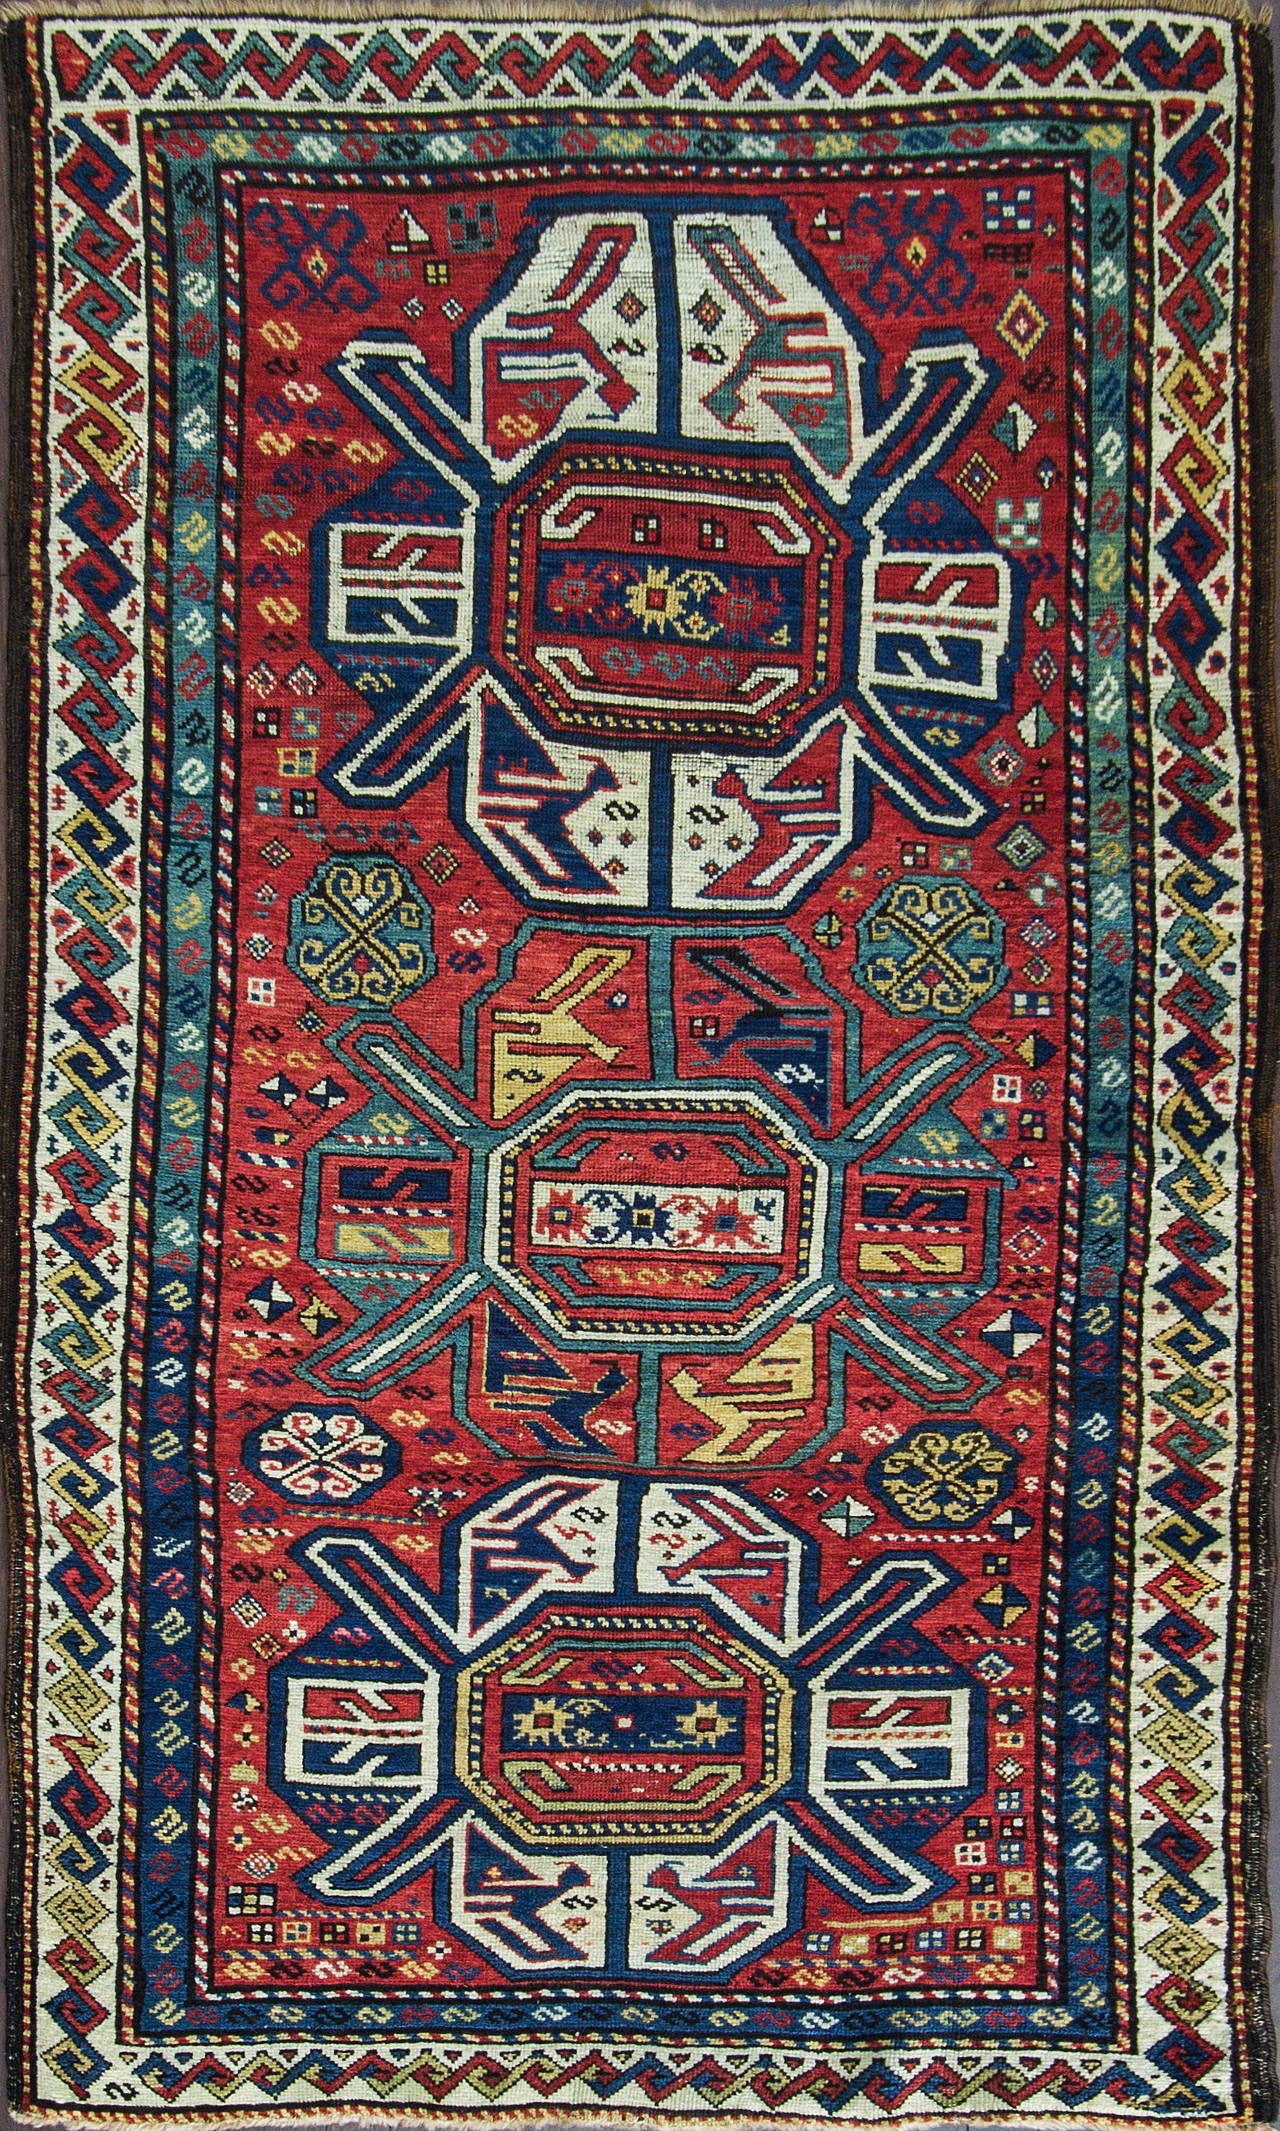 Caucasian rugs are made in the rugged mountains and lush valleys of Armenia, Azerbaijan and Georgia. This area was populated by Armenian dyers and weavers, Azeri Turks, groups from the Northern Caucasus and minorities from the surrounding areas. The